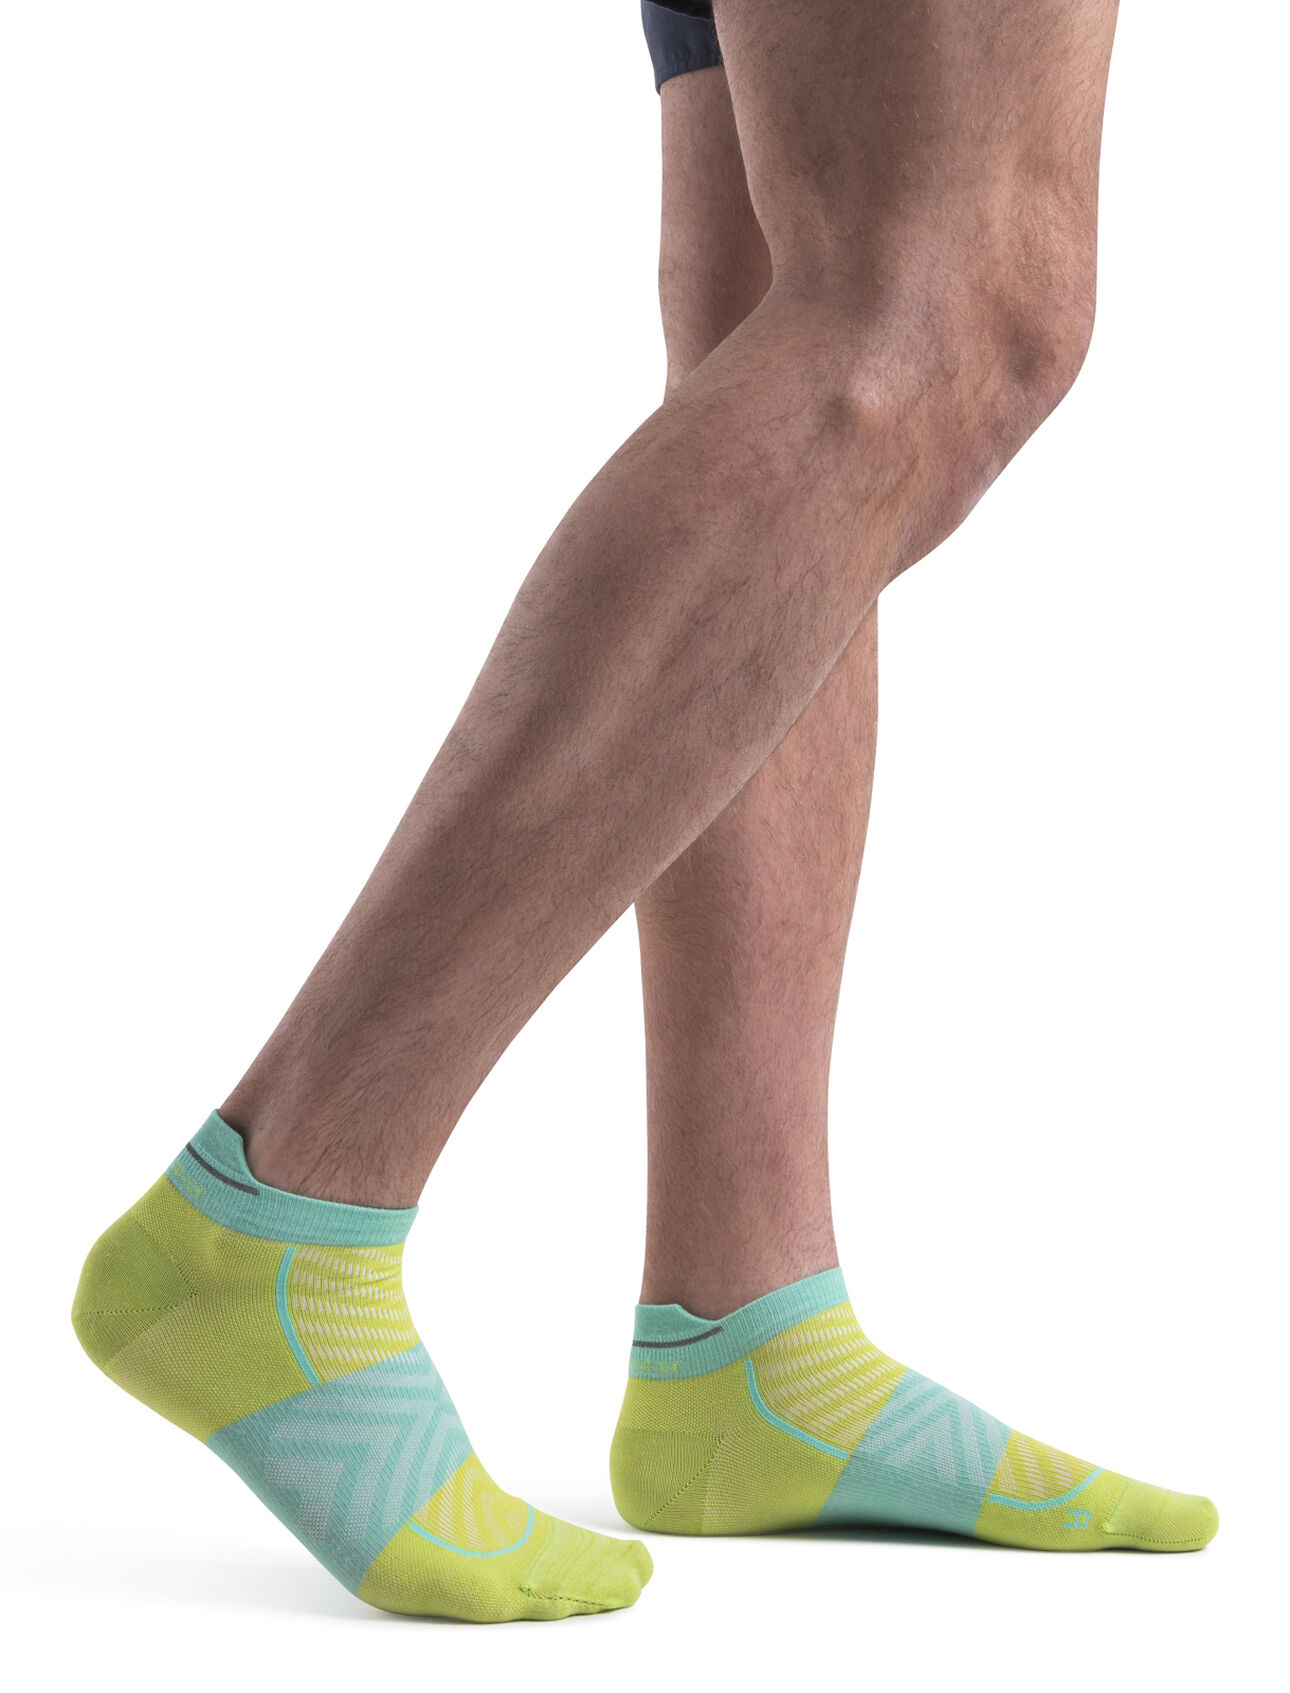 Mens Merino Blend Run+ Ultralight Micro Socks Thin, ultralight running socks made with a technical merino wool blend and no-show height, the Merino Run+ Ultralight Micro is perfect for runs of any length. A reflective stripe on the back helps keep you visible in low-light conditions.